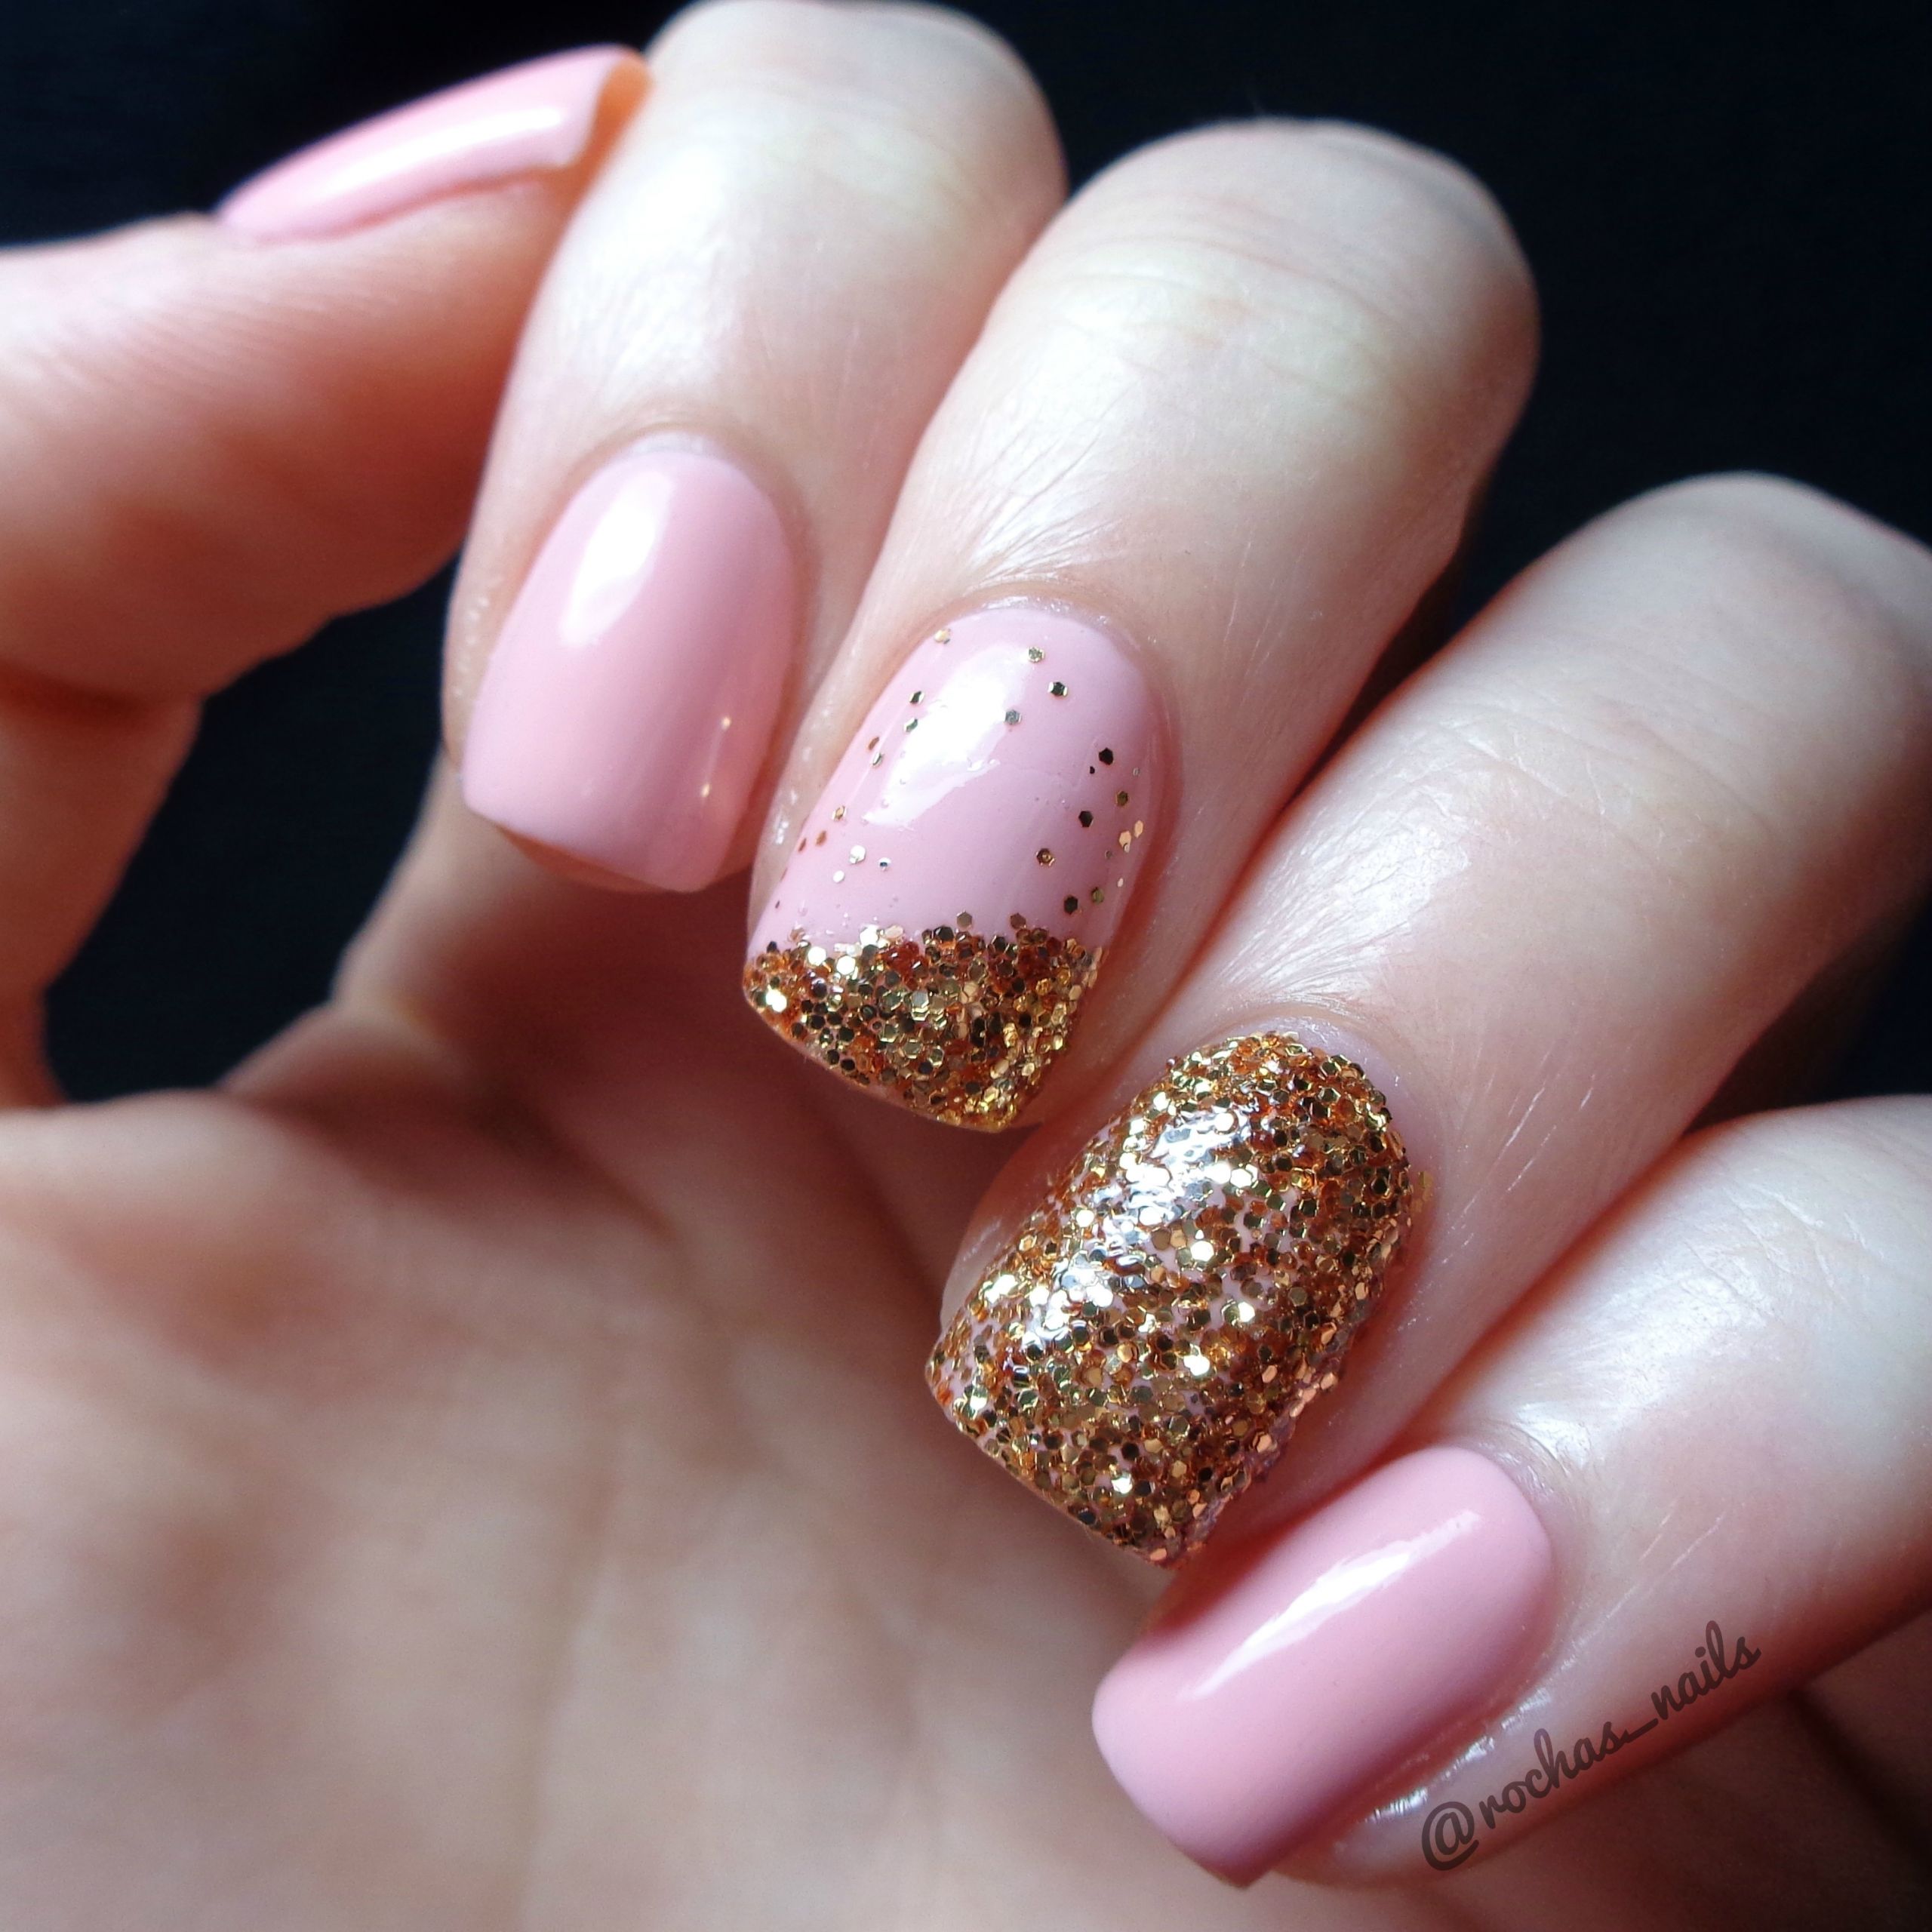 White Nails With Gold Glitter
 BornPrettyStore Rose Gold Loose Glitter Review